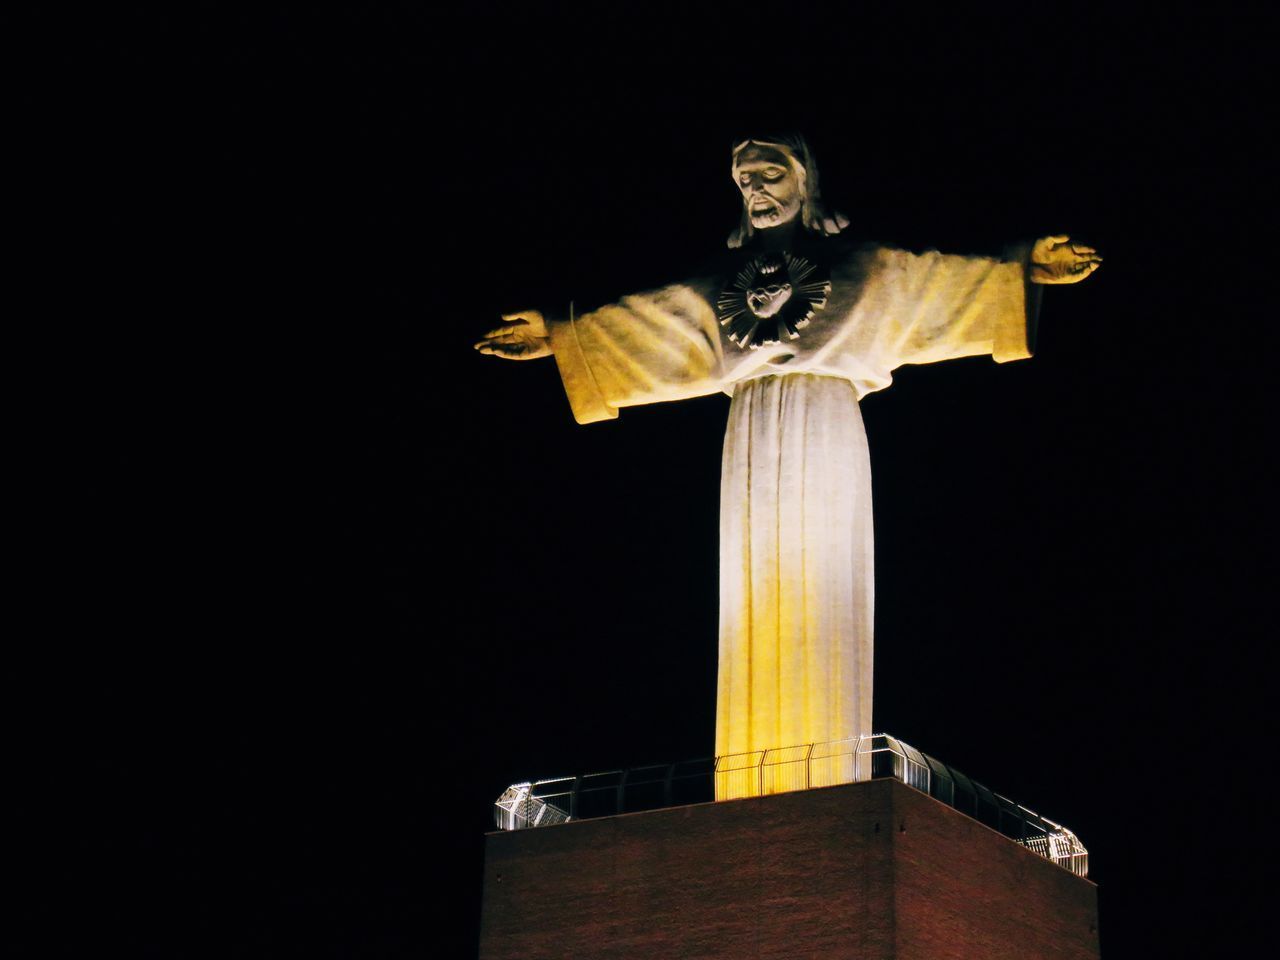 LOW ANGLE VIEW OF CROSS STATUE AGAINST SKY